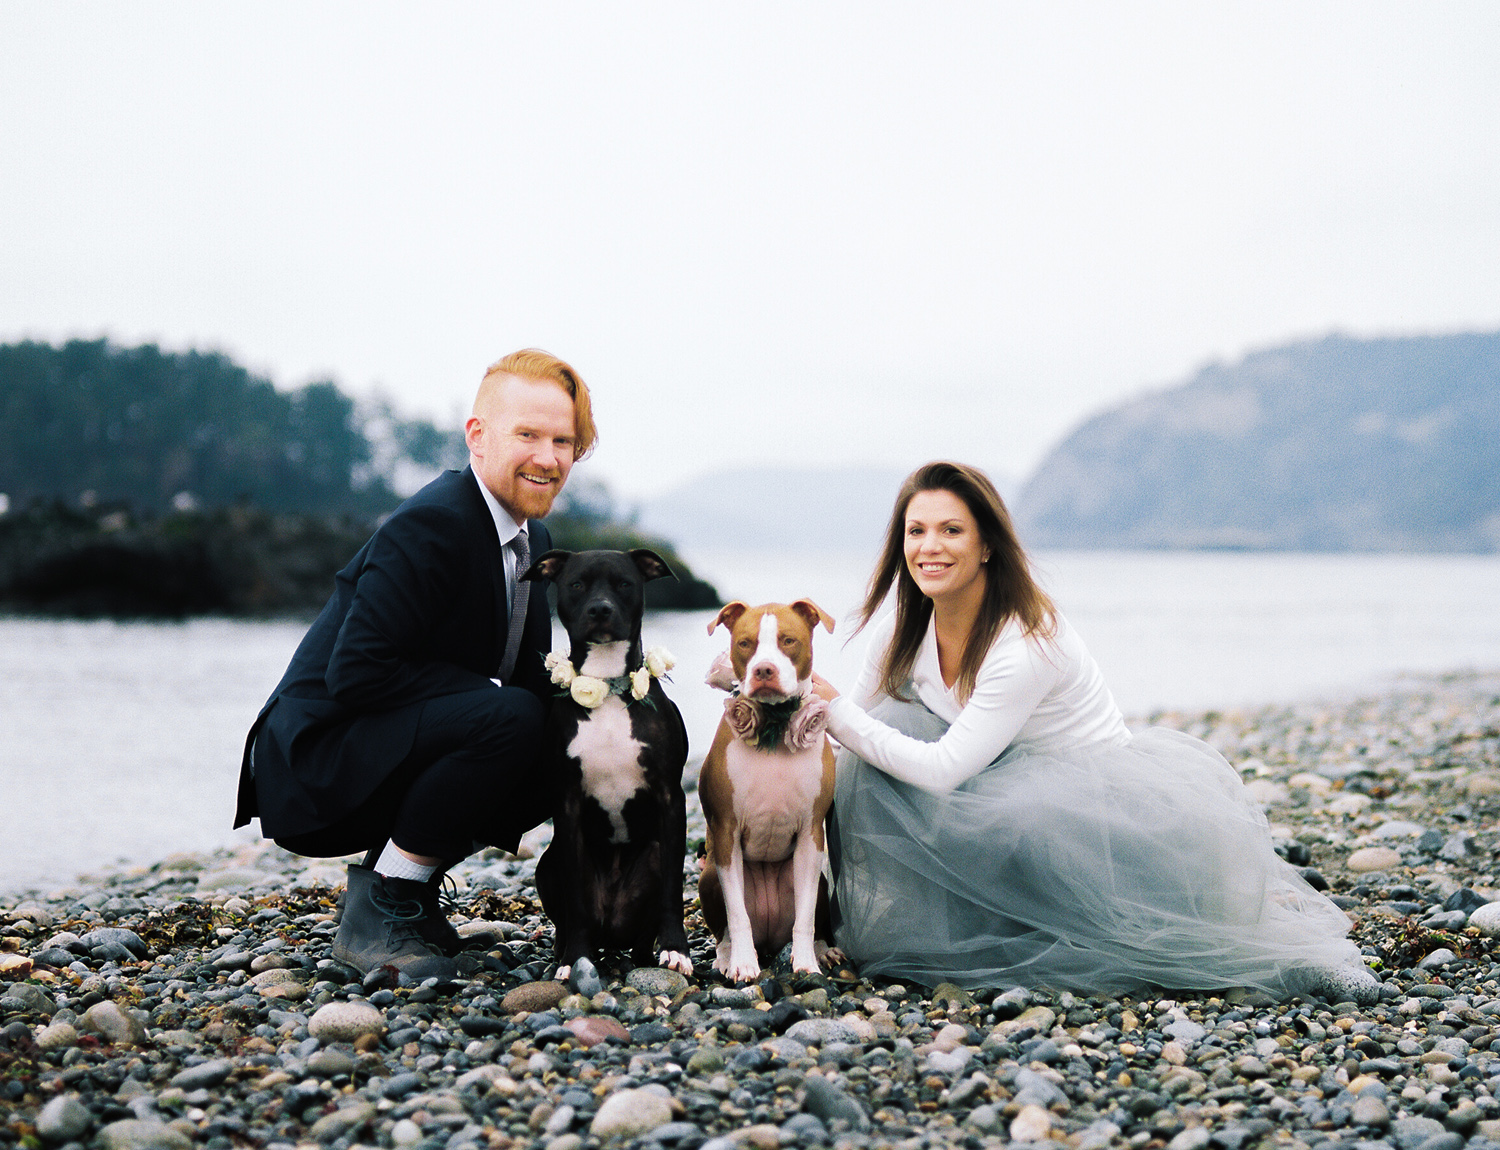 Seattle Area Formal Engagement Session with dogs.jpg